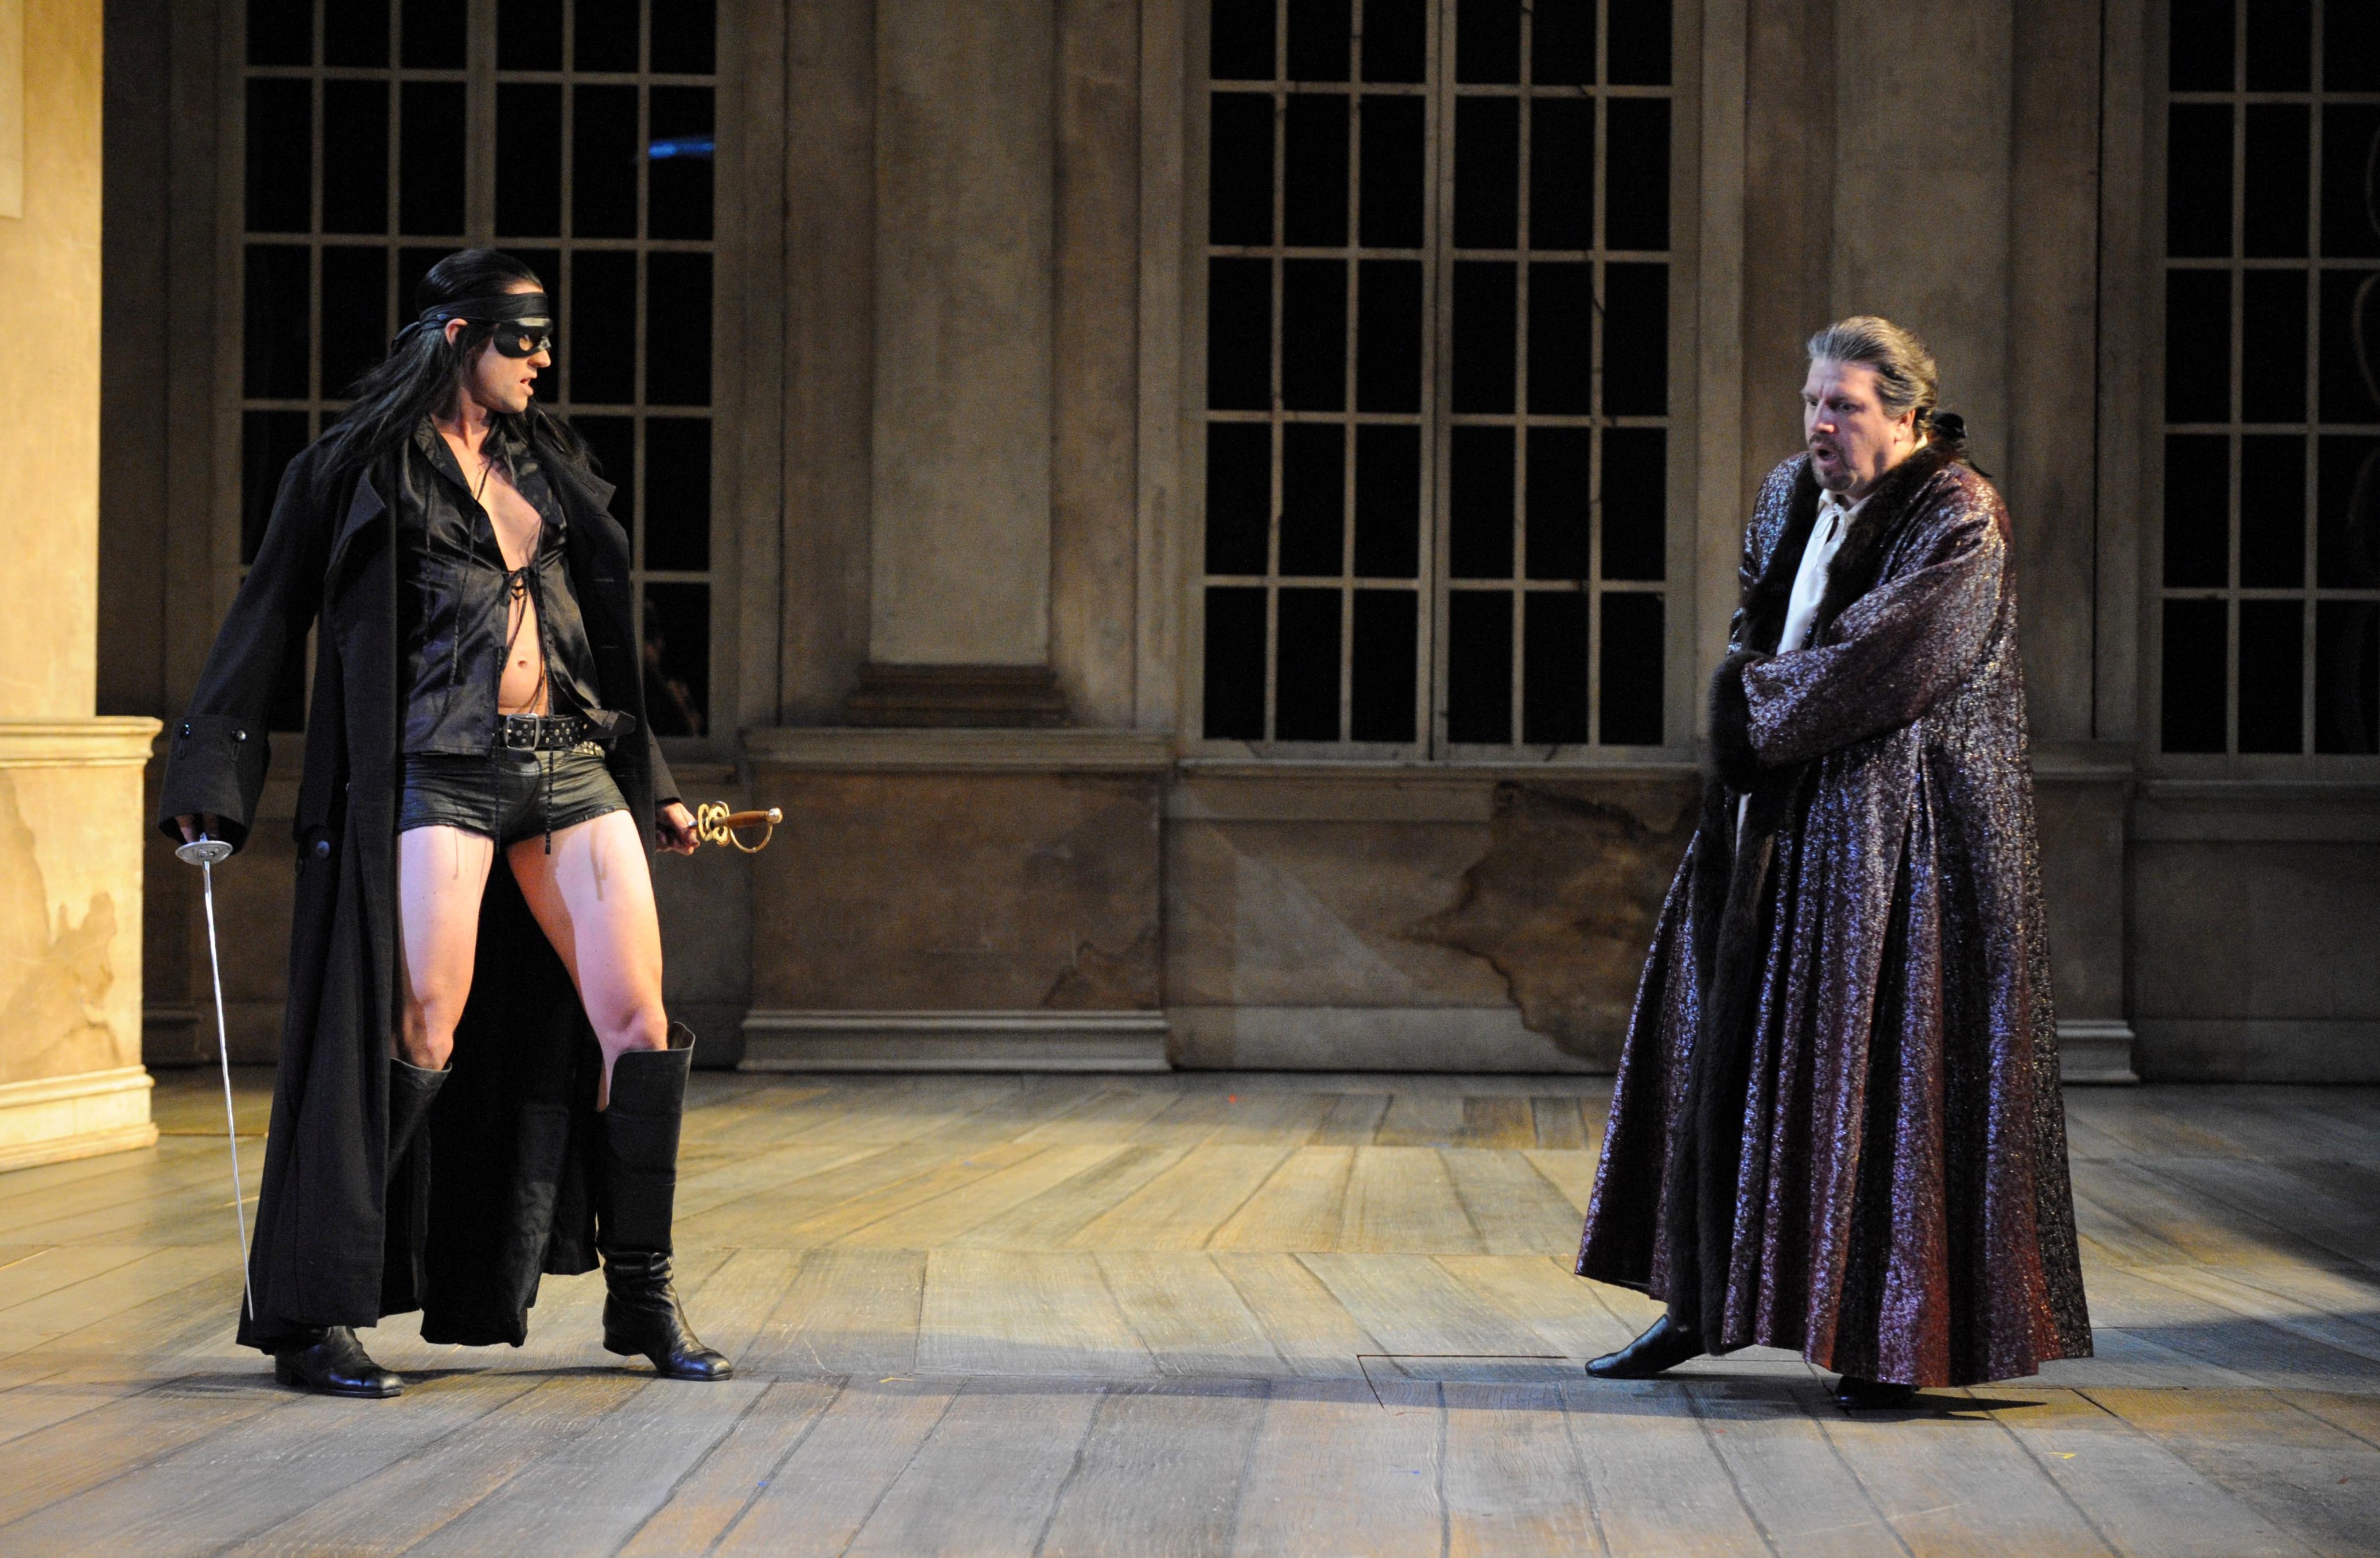 Scenes from Don Giovanni